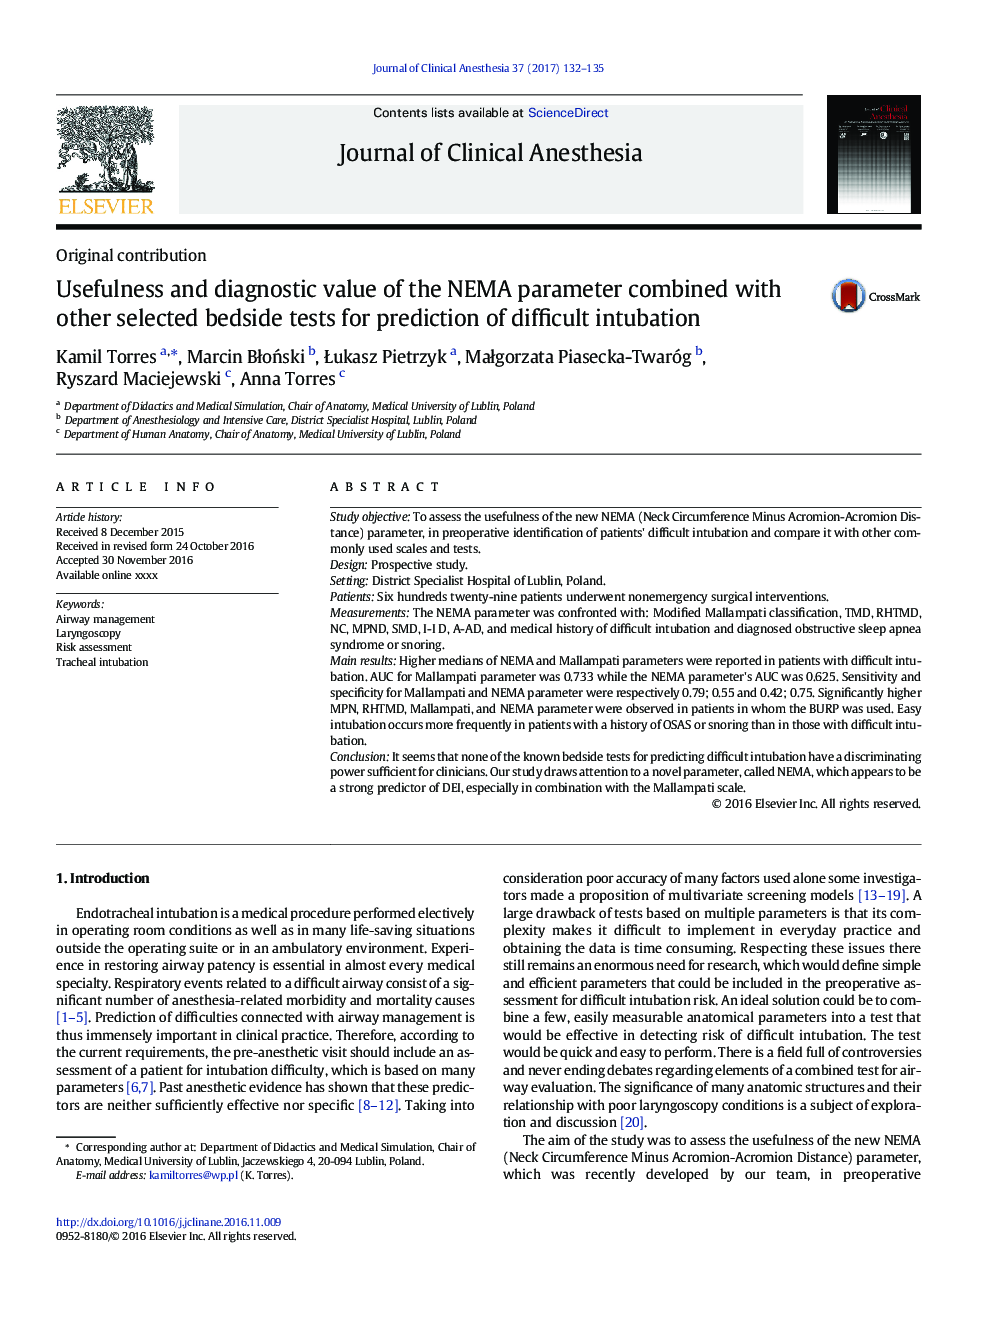 Usefulness and diagnostic value of the NEMA parameter combined with other selected bedside tests for prediction of difficult intubation